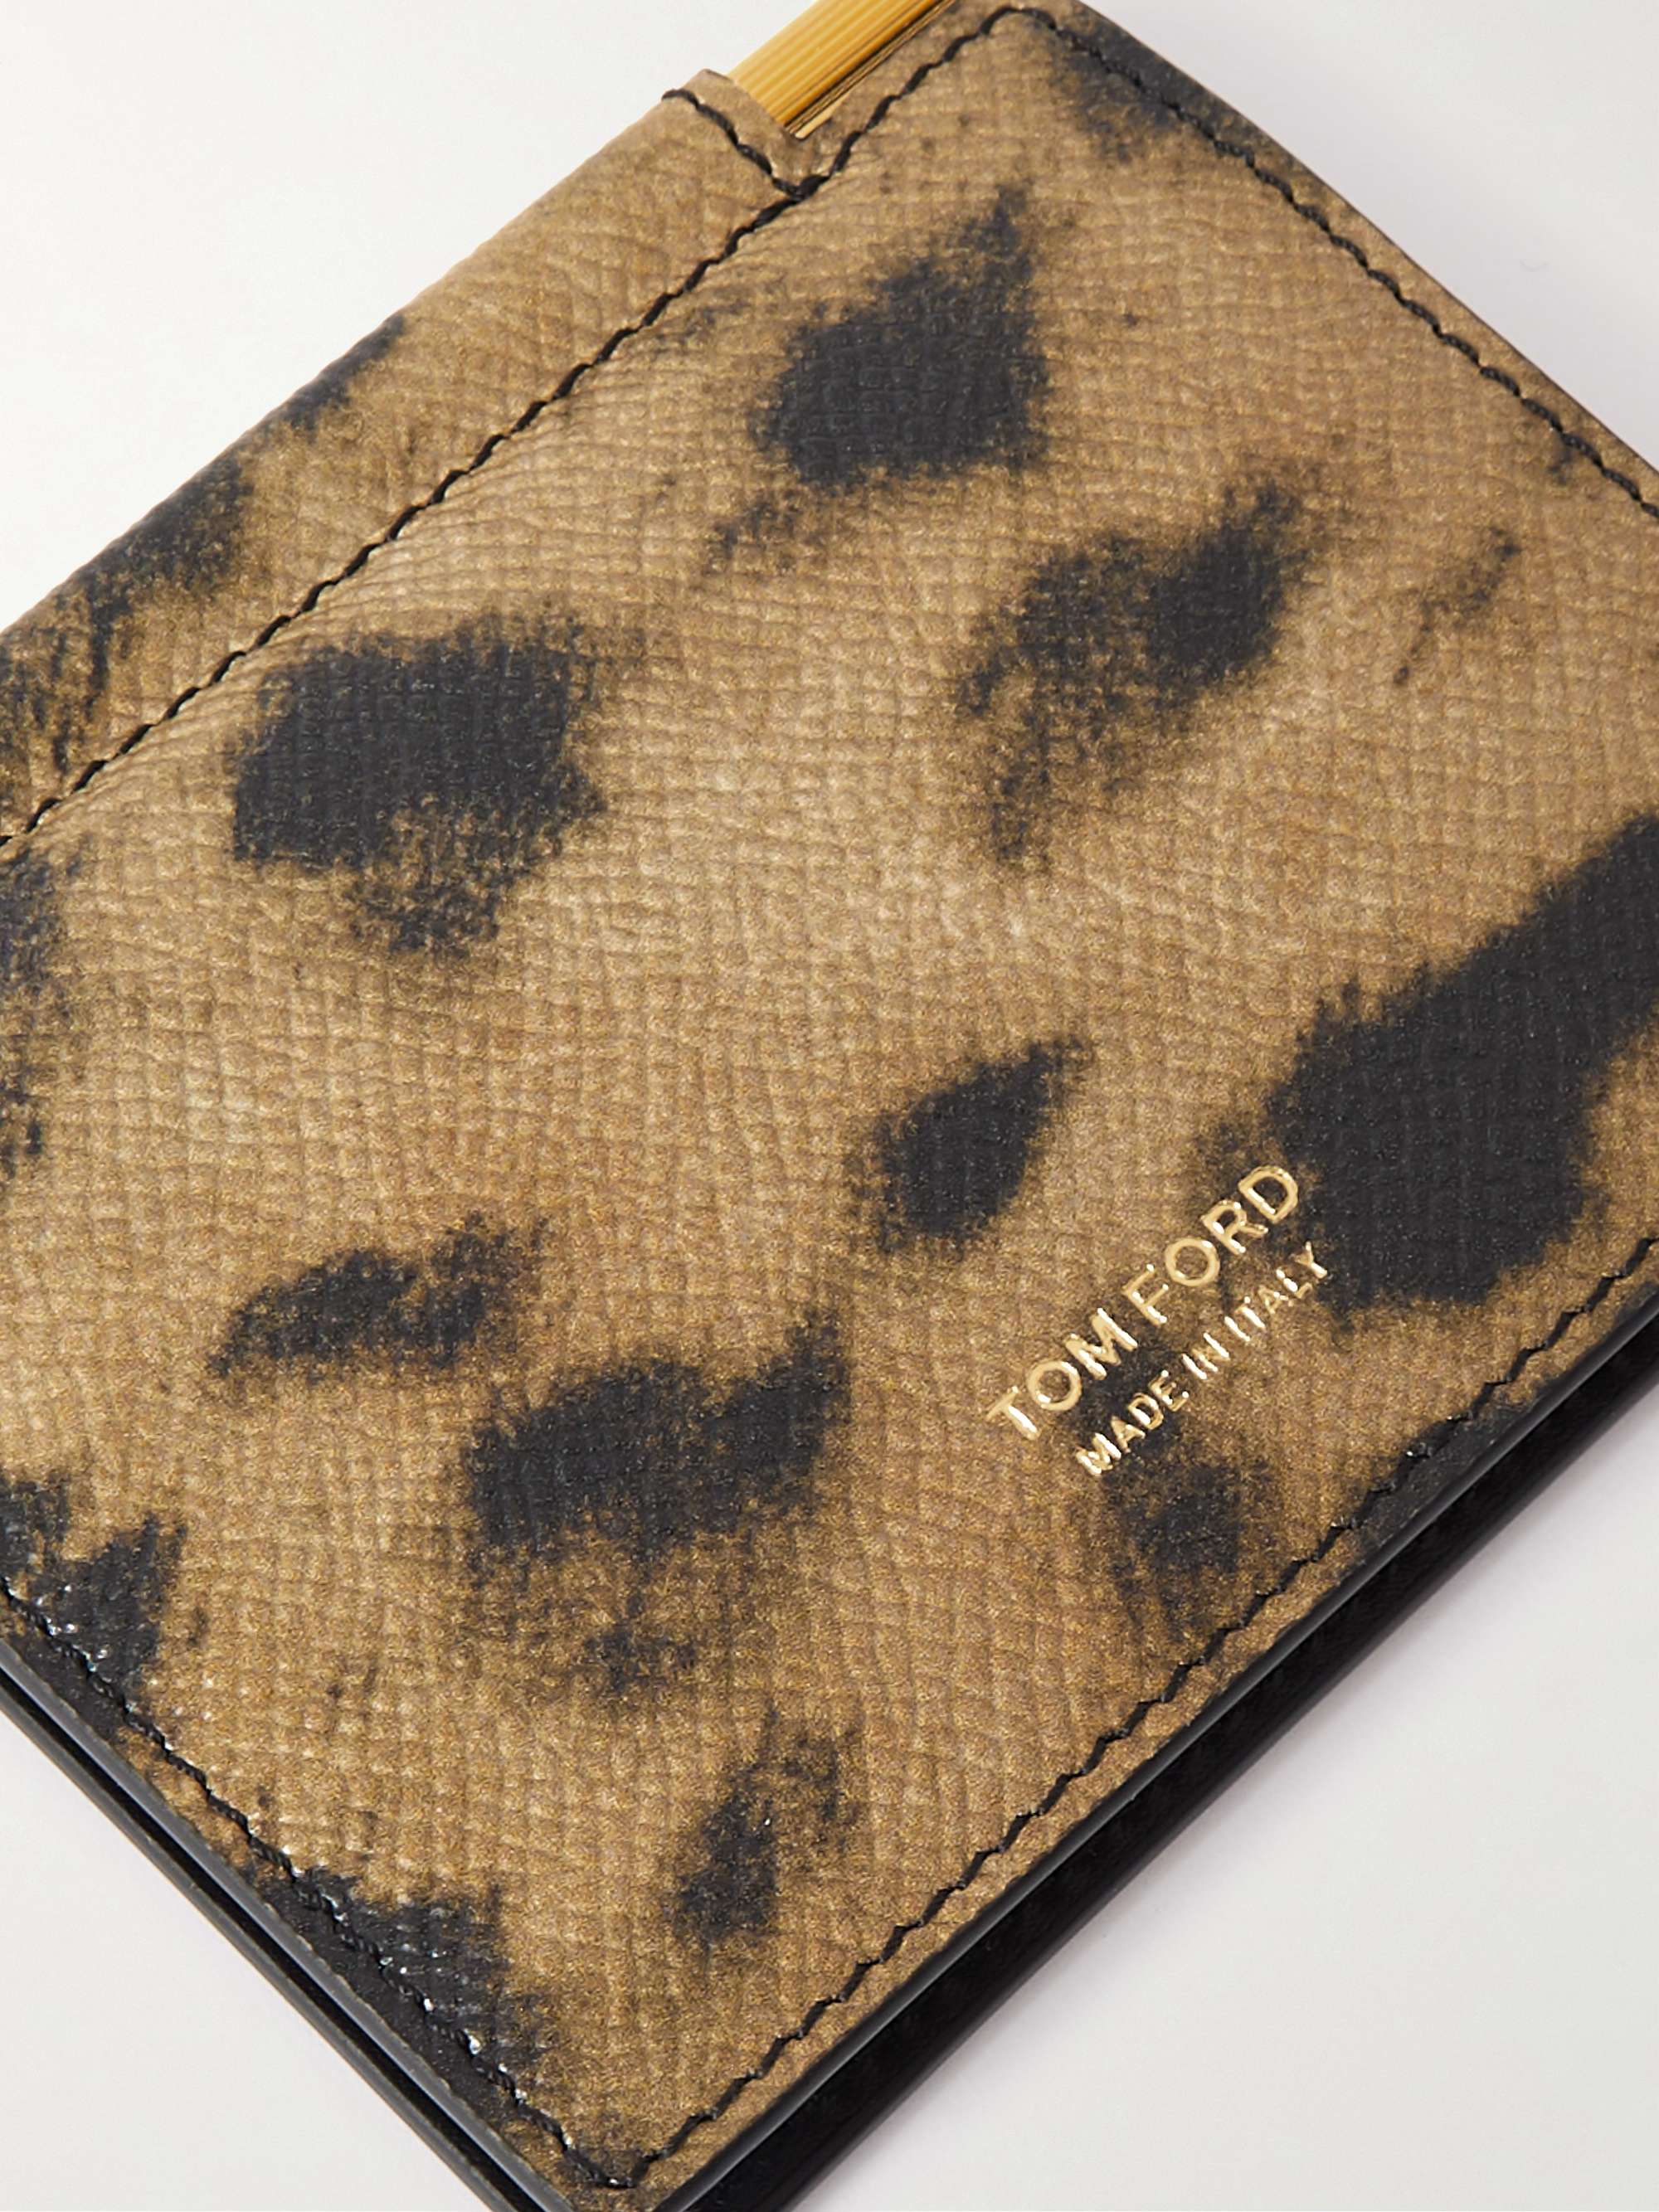 TOM FORD Leopard-Print Full-Grain Leather Bifold Cardholder with Money Clip